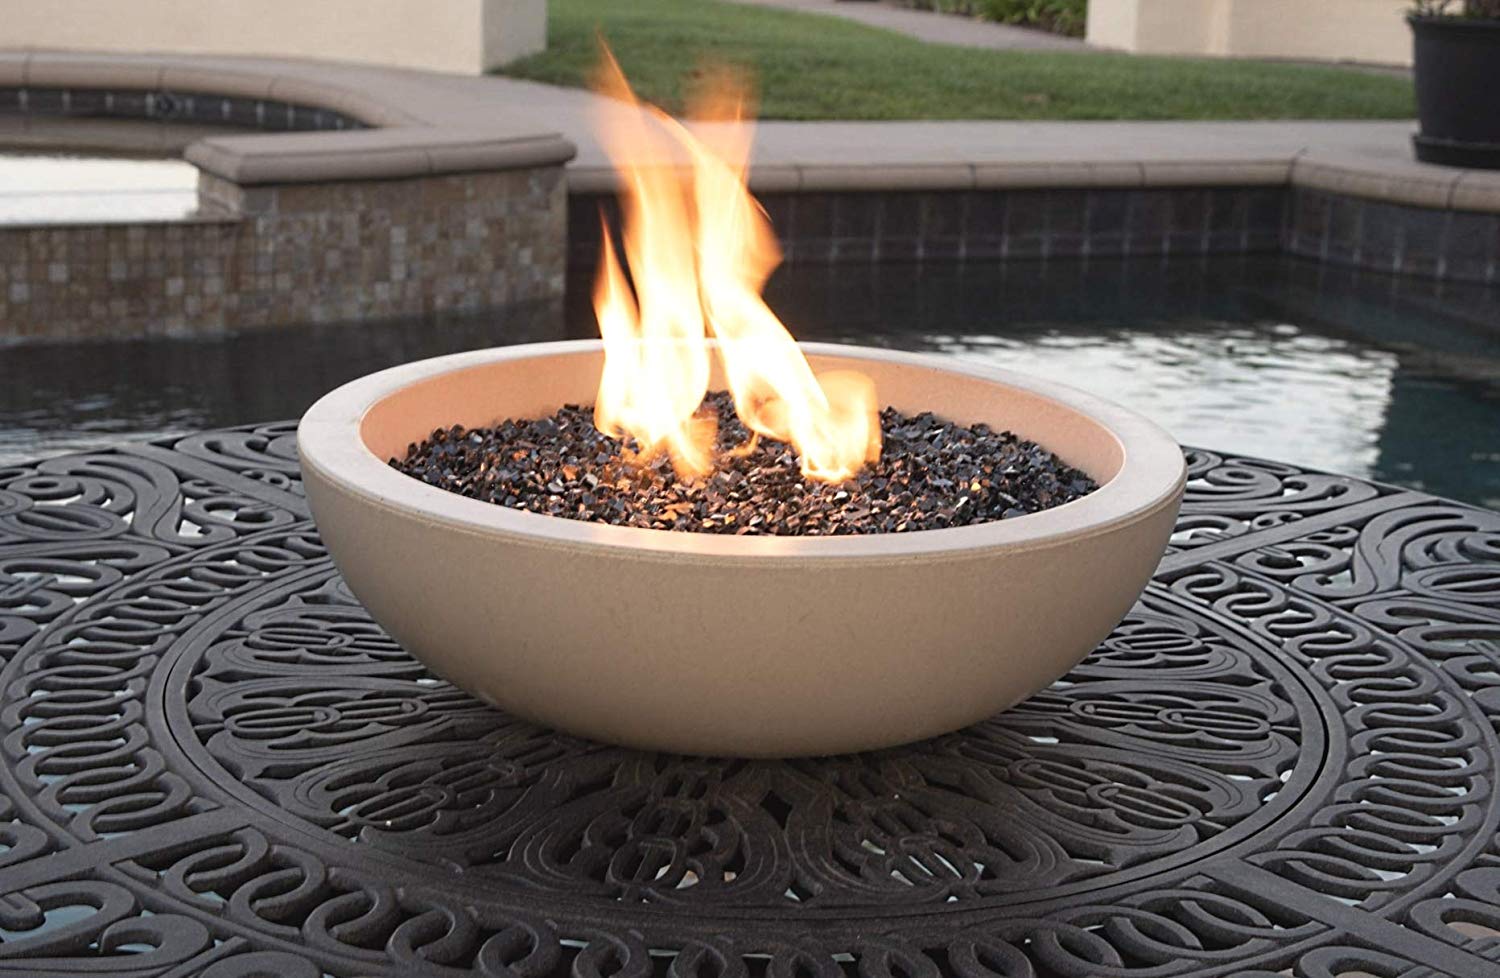 Heat Shield to Protect Tv Over Fireplace Lovely A Fire Pit for Your Patio Table Landscape Quality Tabletop Fire Bowl Made Of Concrete with 50 000 Btu Stainless Steel Burner Runs On Propane